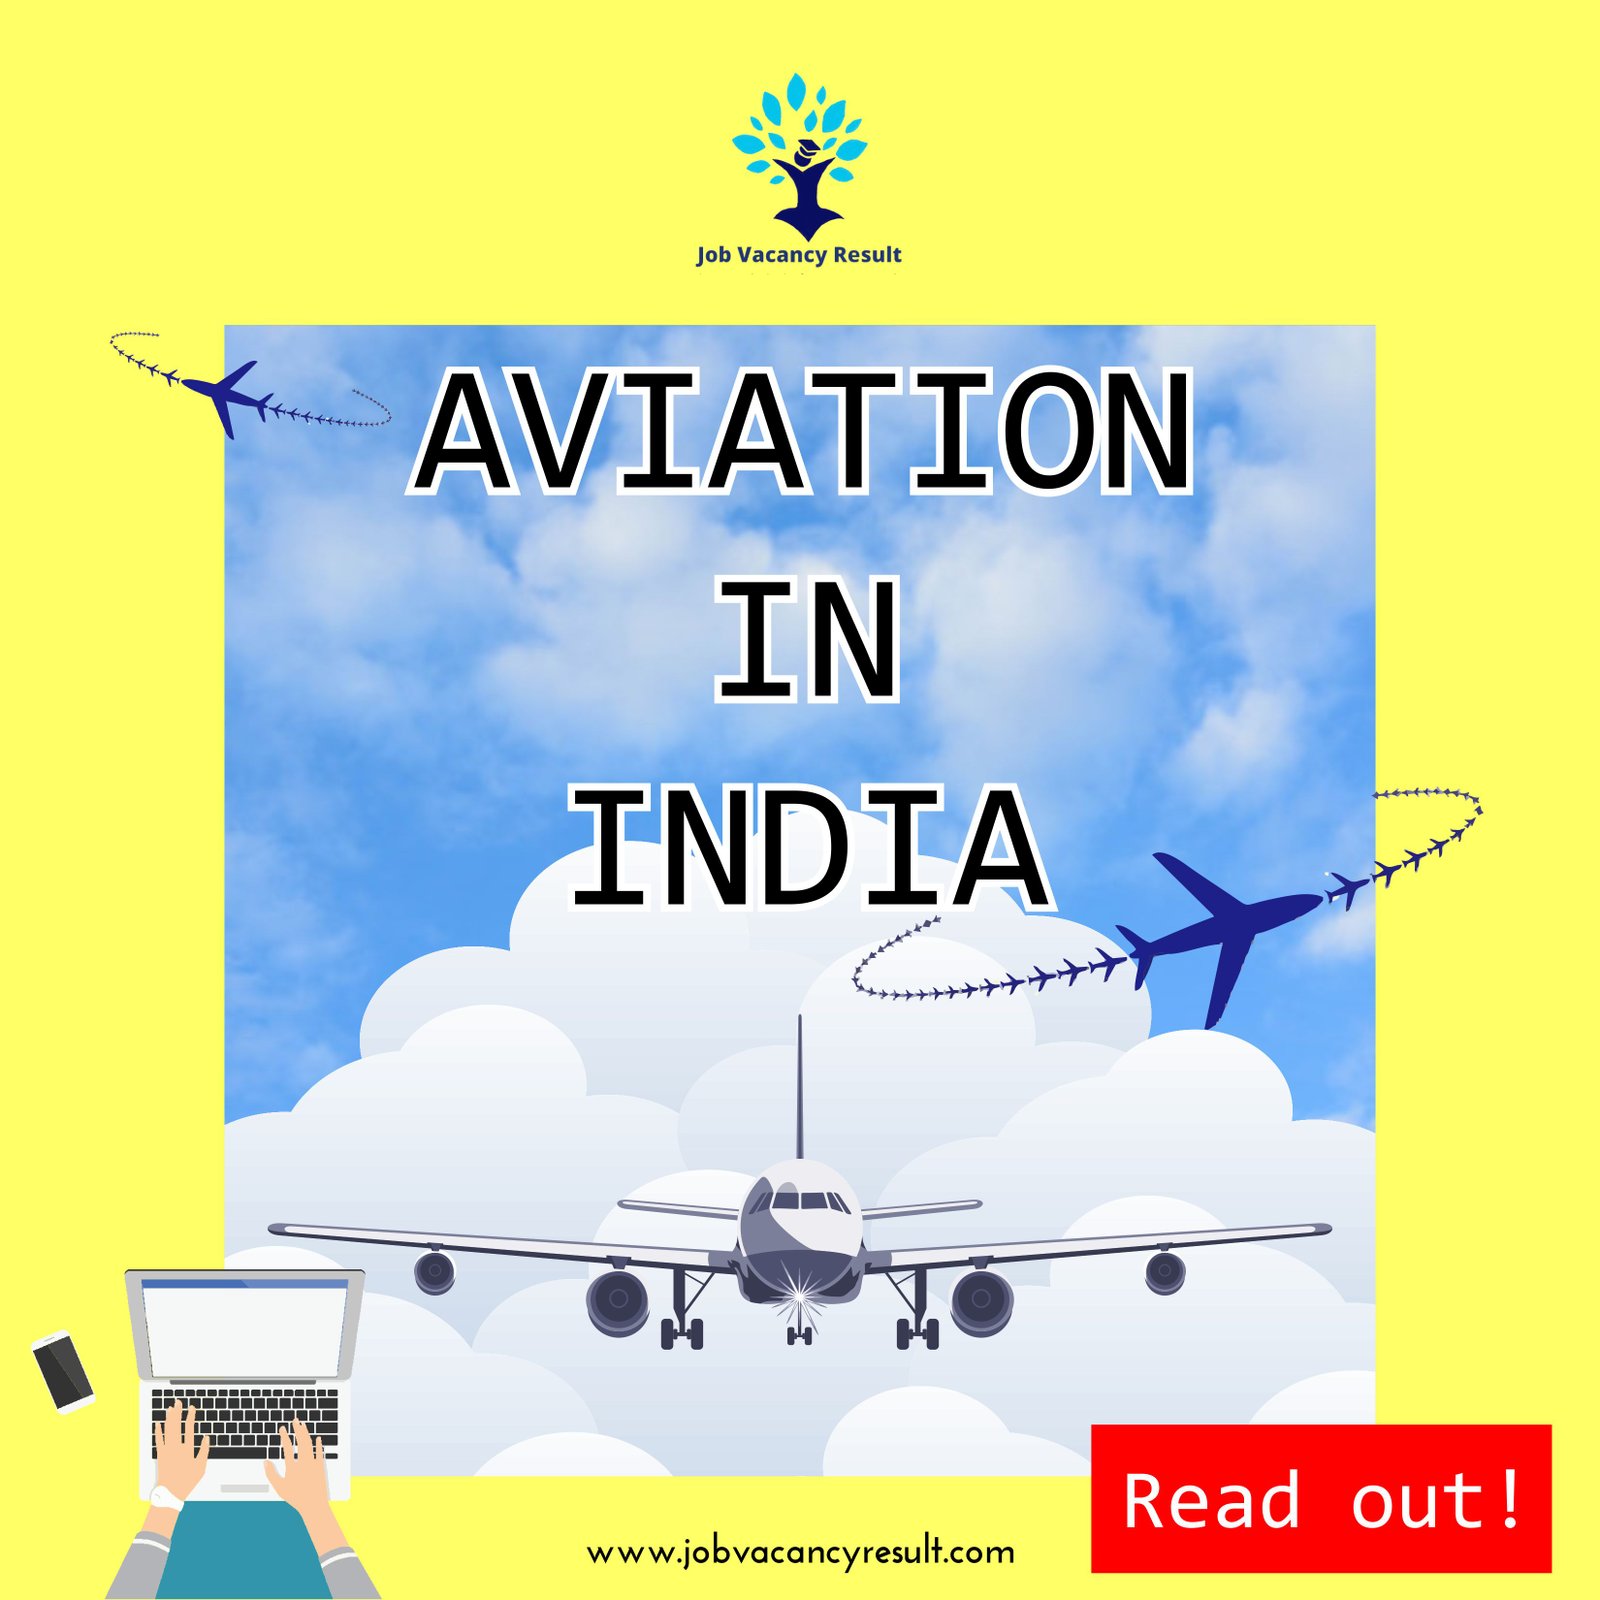 Aviation in India